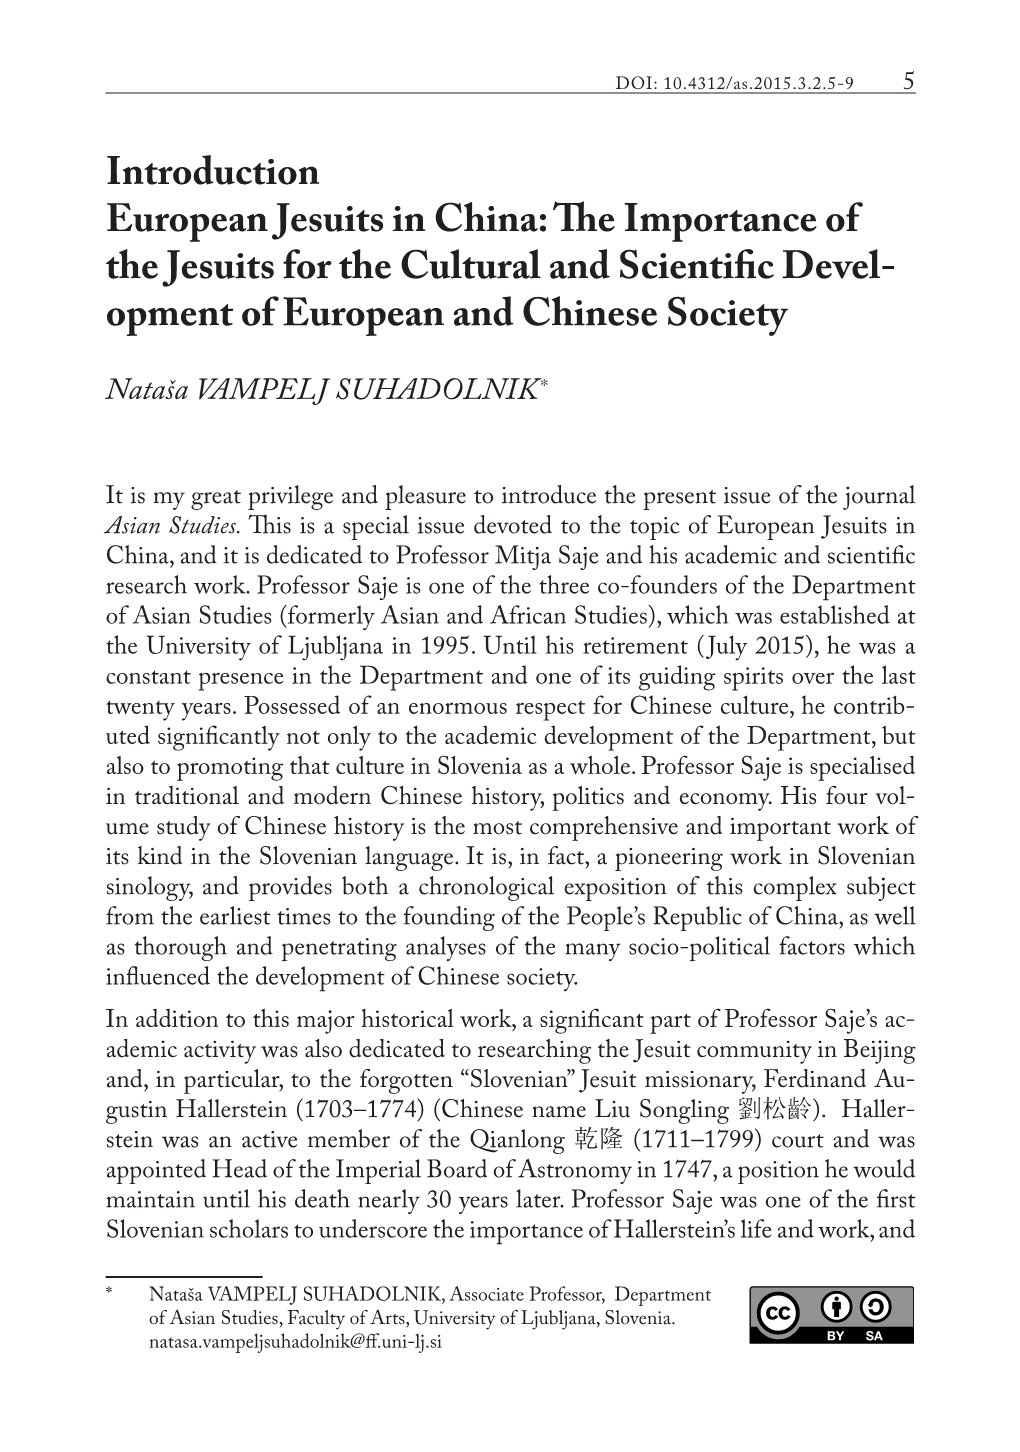 Introduction European Jesuits in China: the Importance of the Jesuits for the Cultural and Scientific Devel- Opment of European and Chinese Society